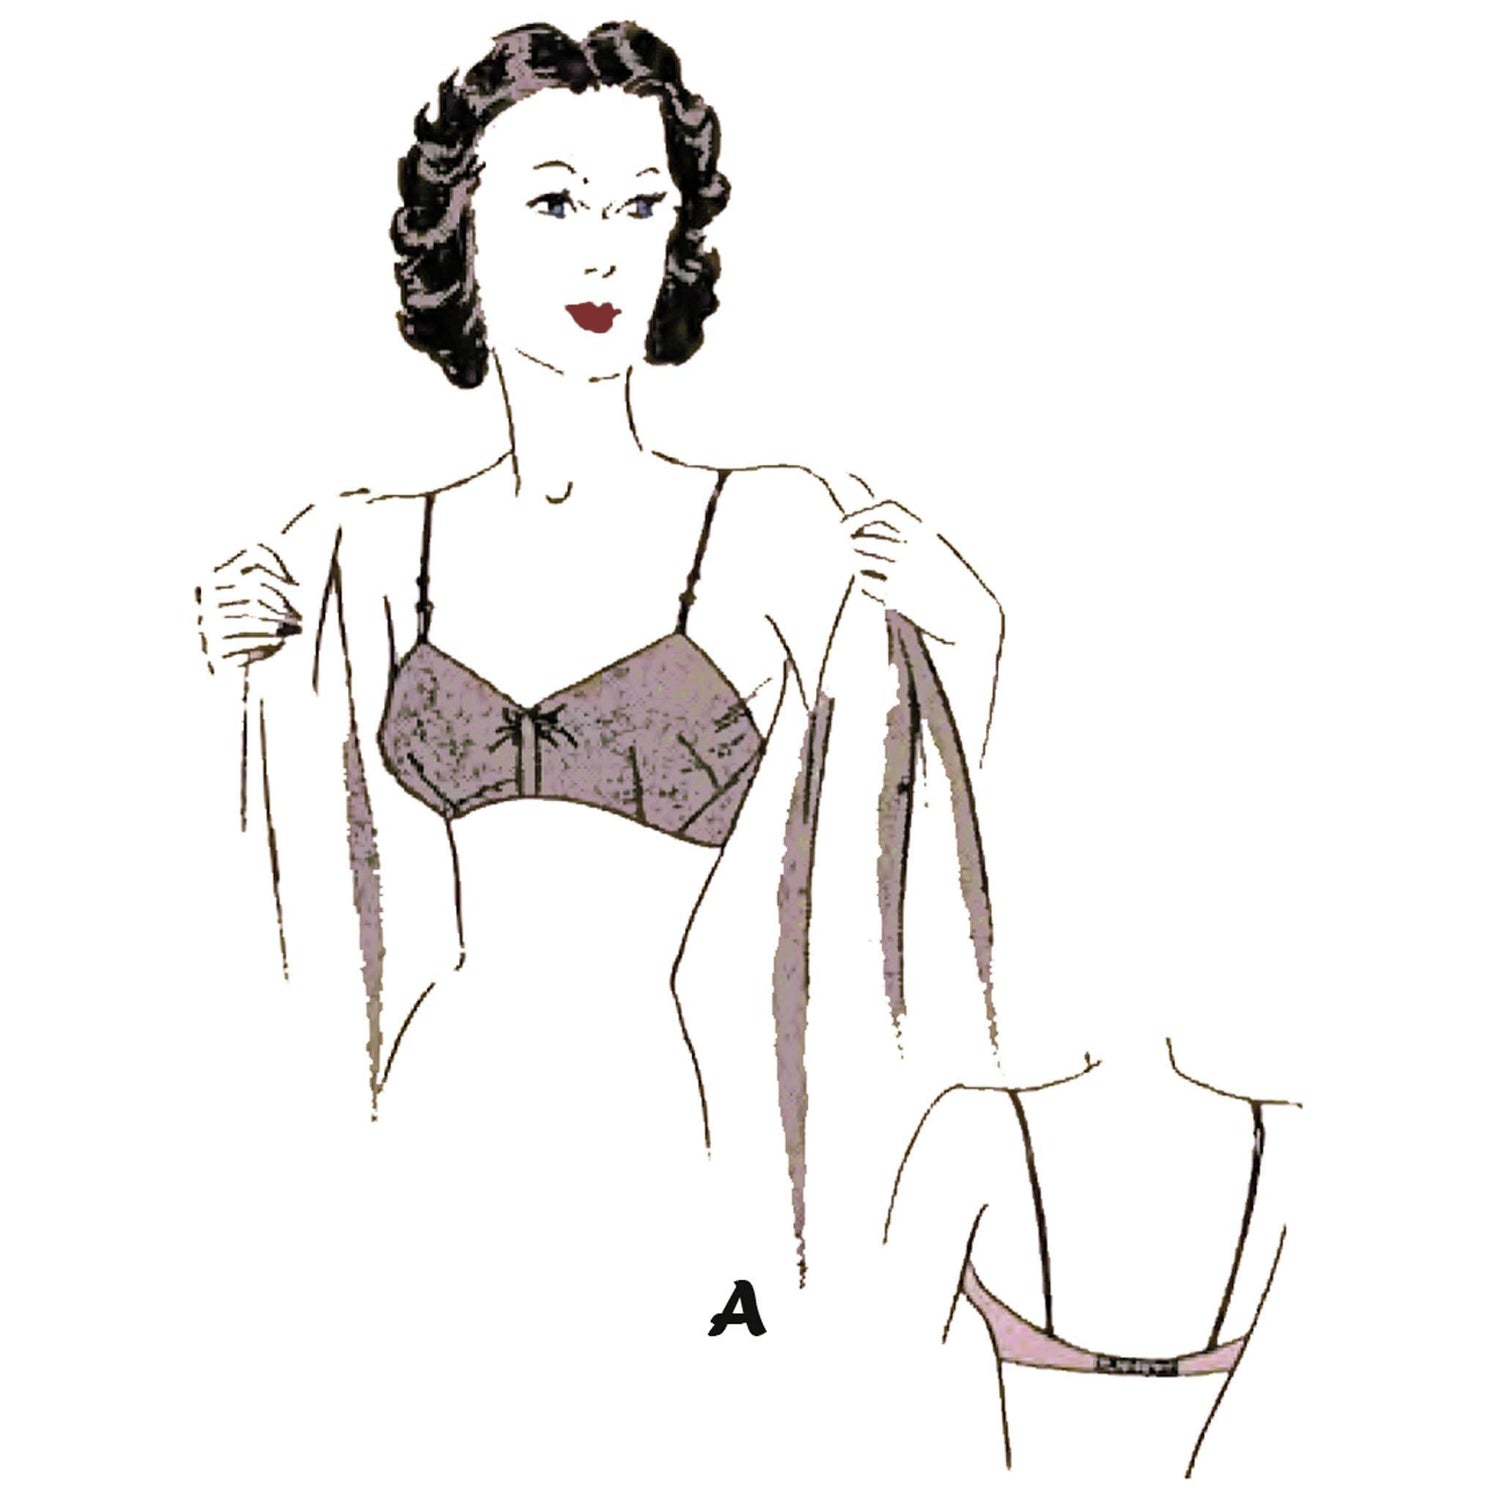 1950s Bra in 2 sizes Bust 36 and 38 ins. Paper Sewing Pattern